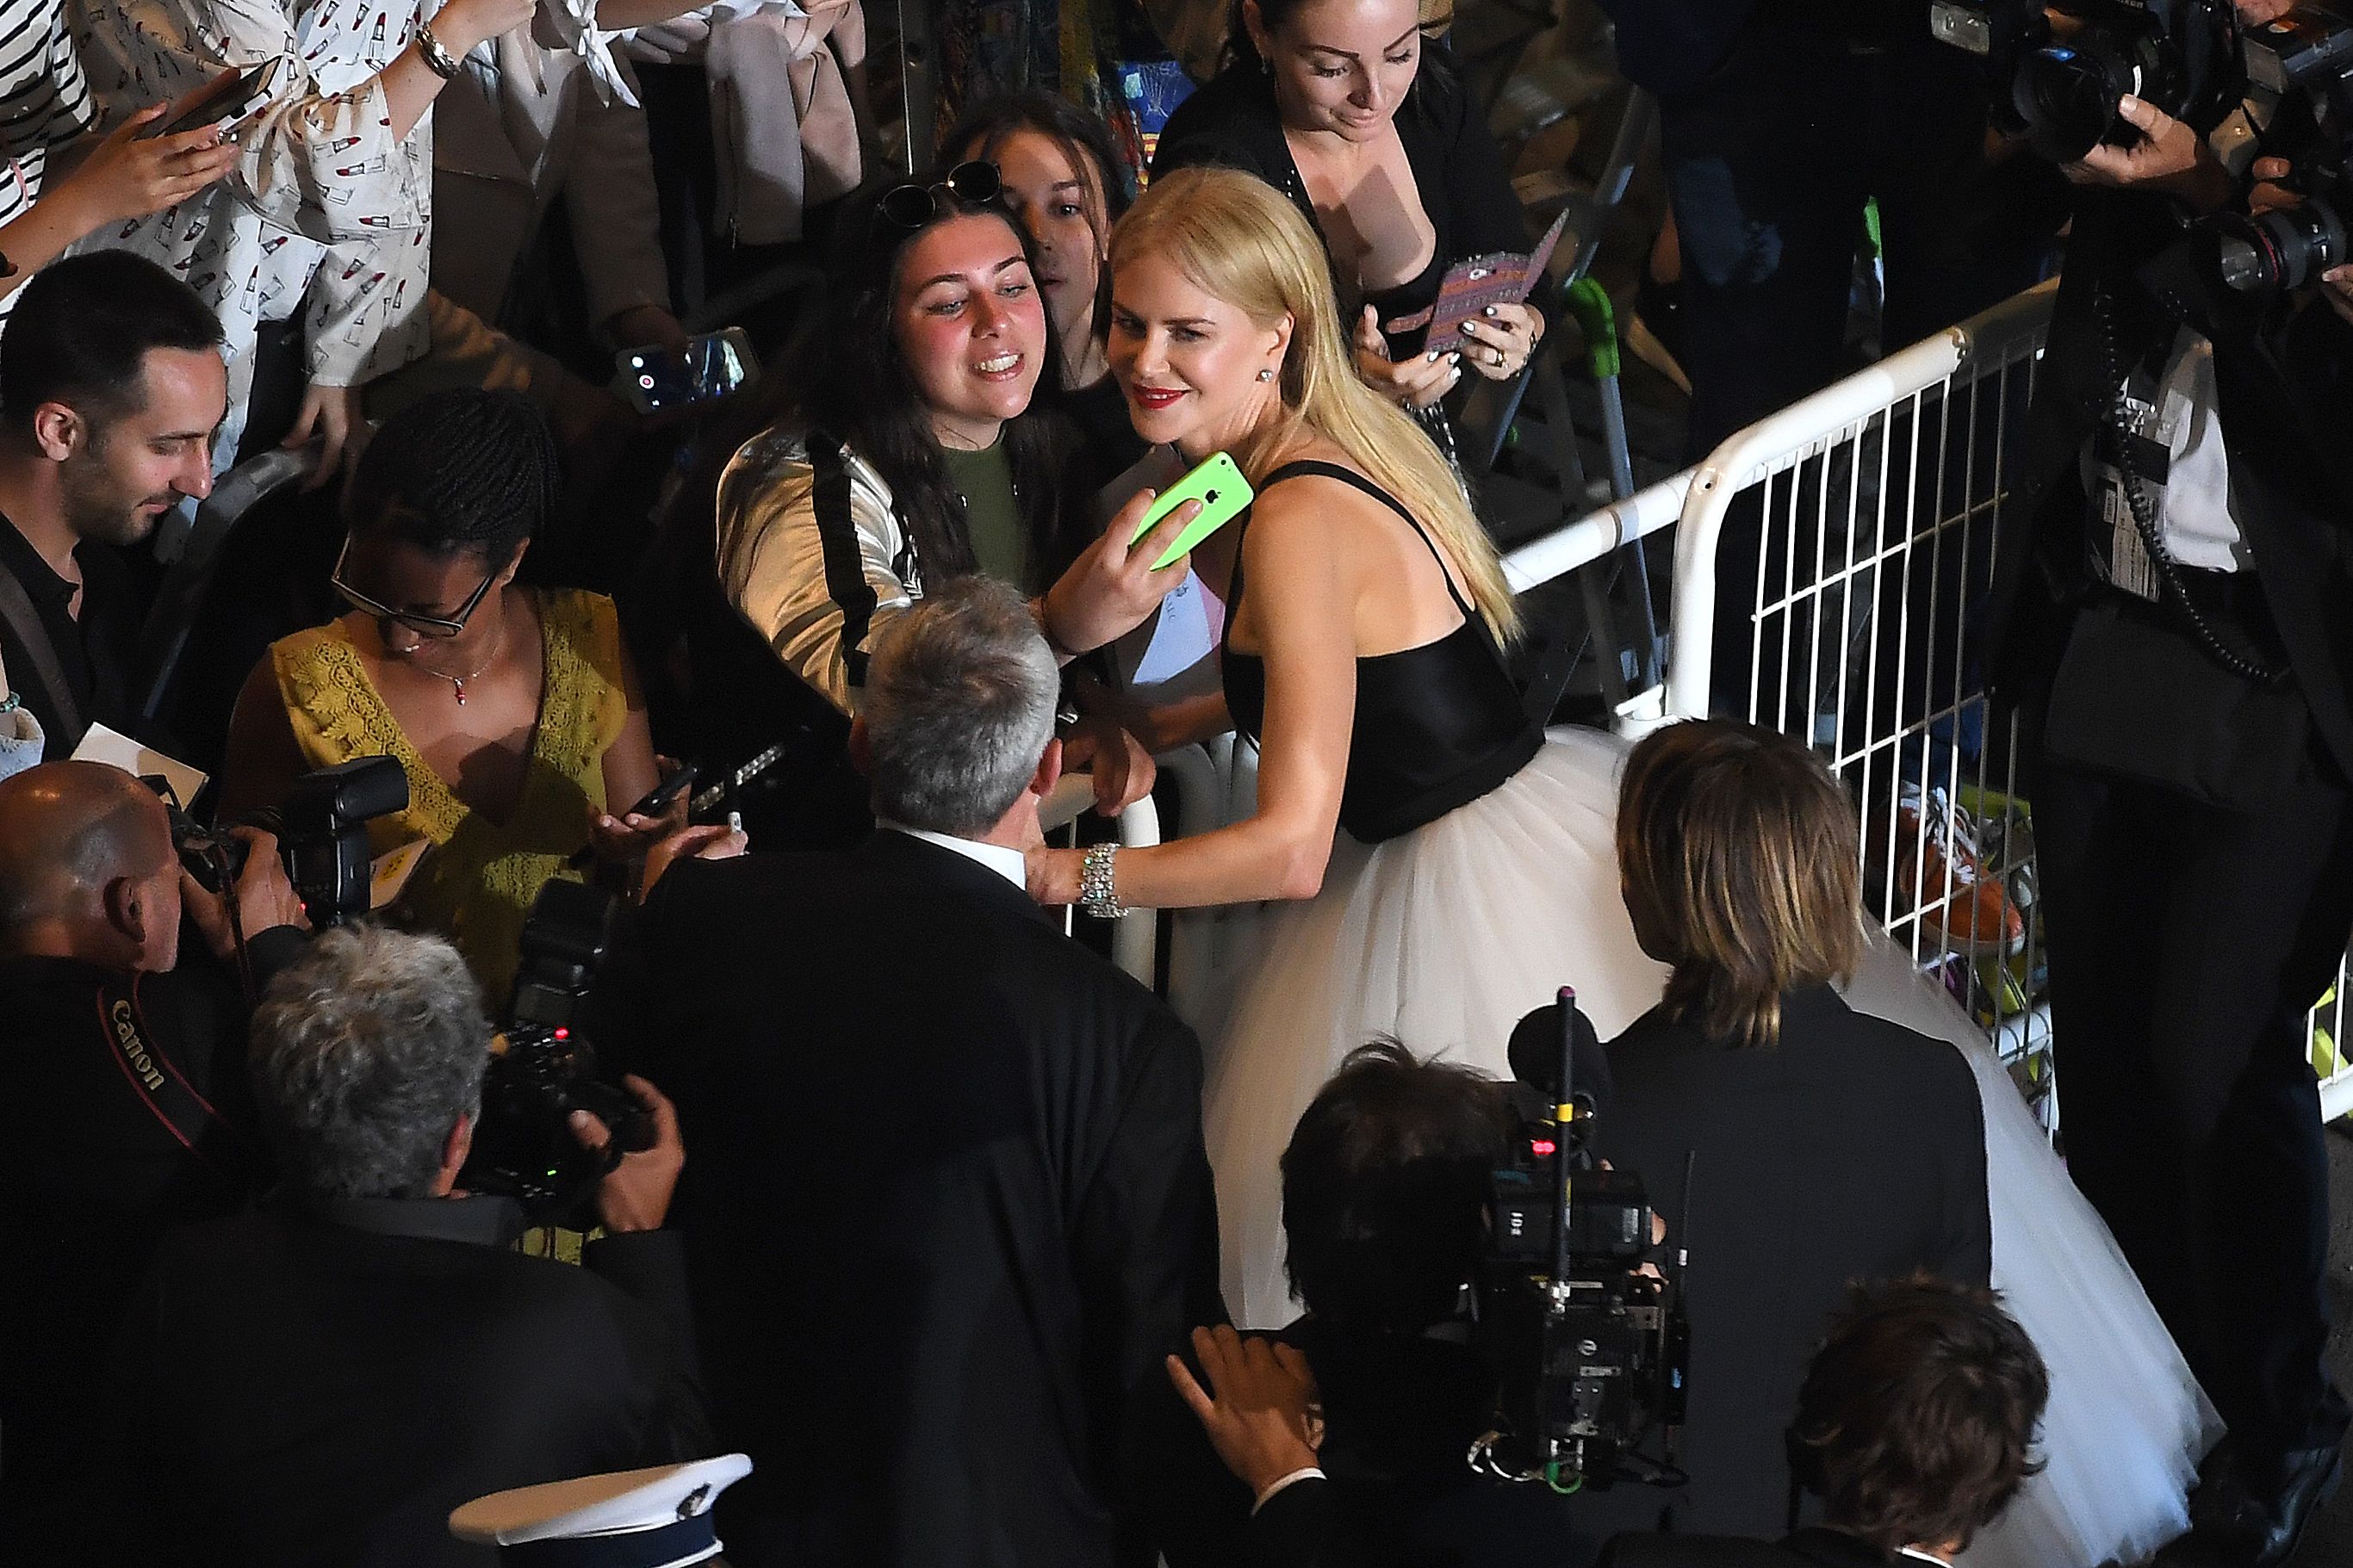 Nicole Kidman taking selfies with fans at the Cannes Film Festival in 2017 | Source: Getty Images